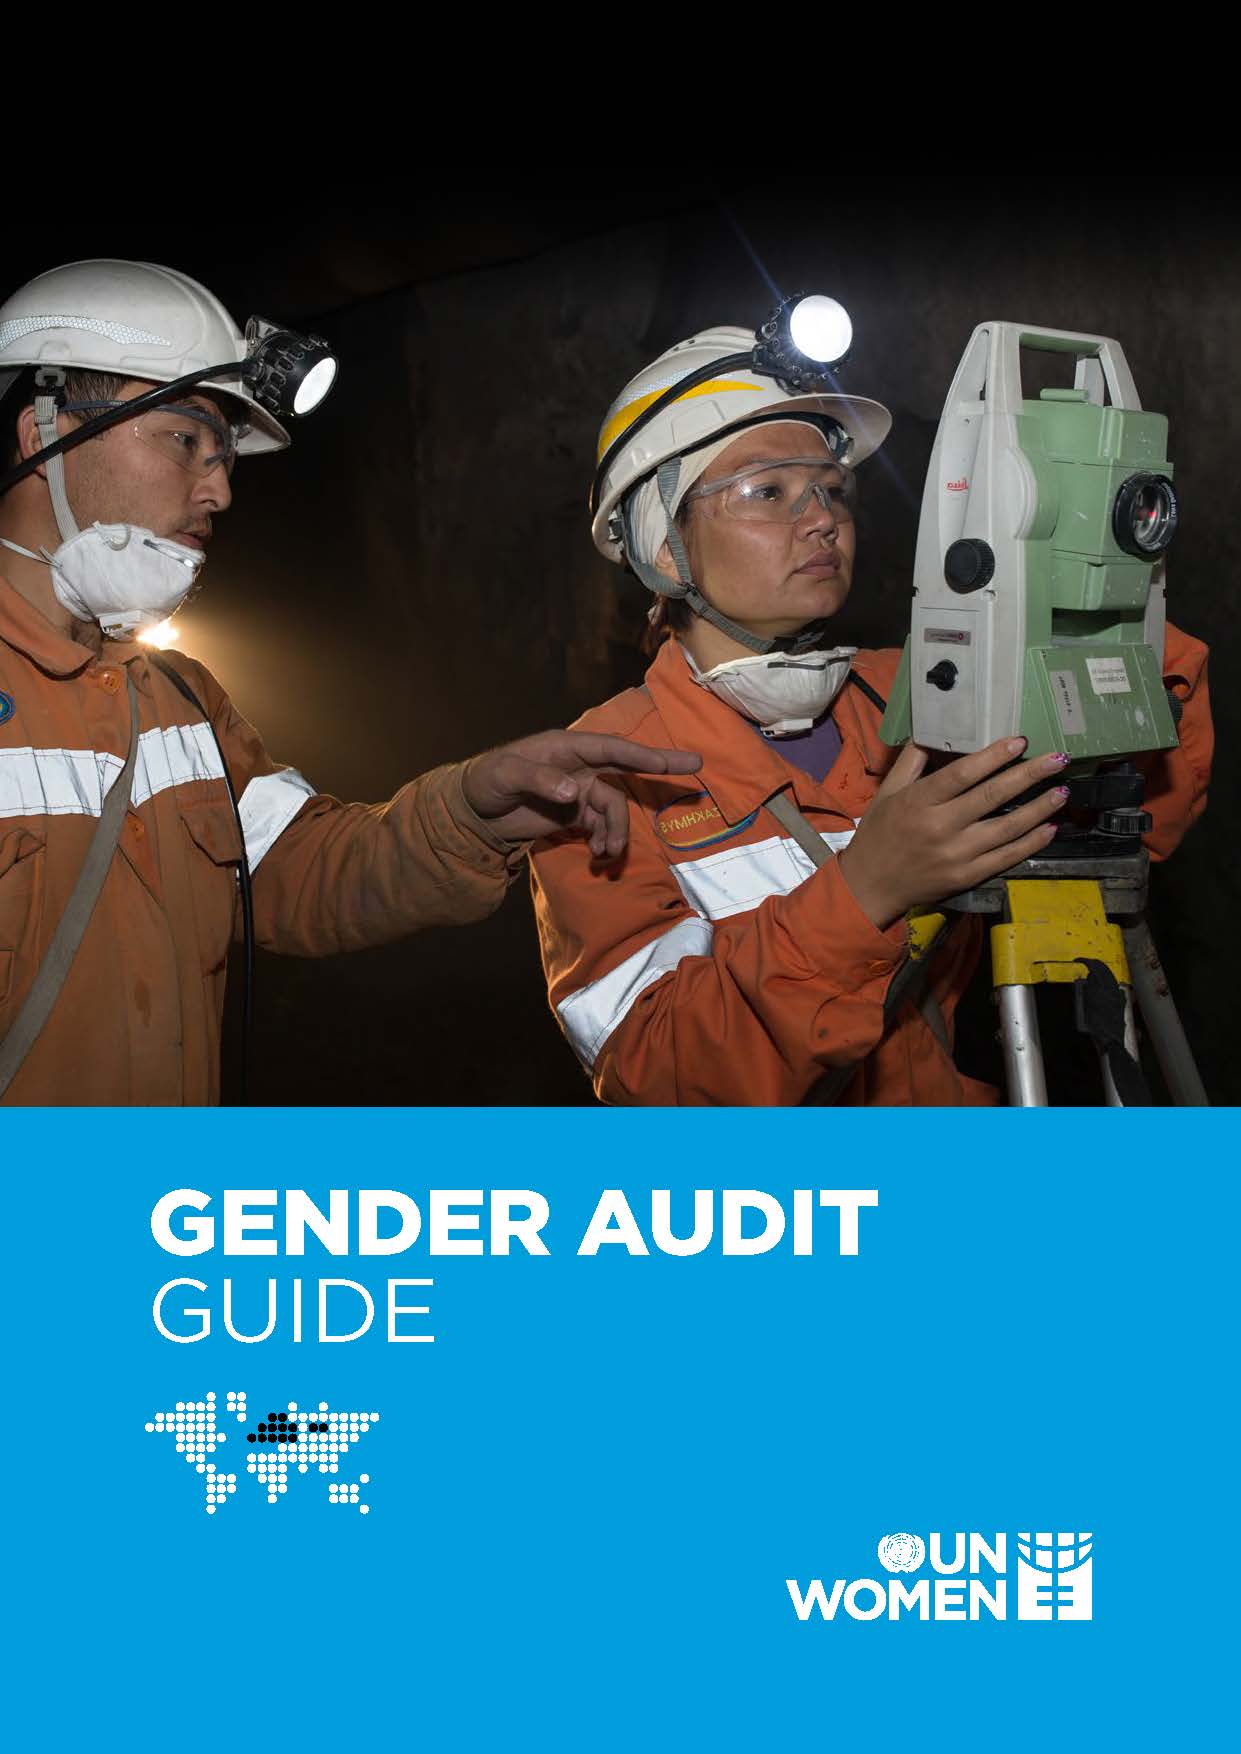 This guide is designed to equip auditors with essential tools and insights, empowering them to integrate gender considerations seamlessly into their auditing processes.